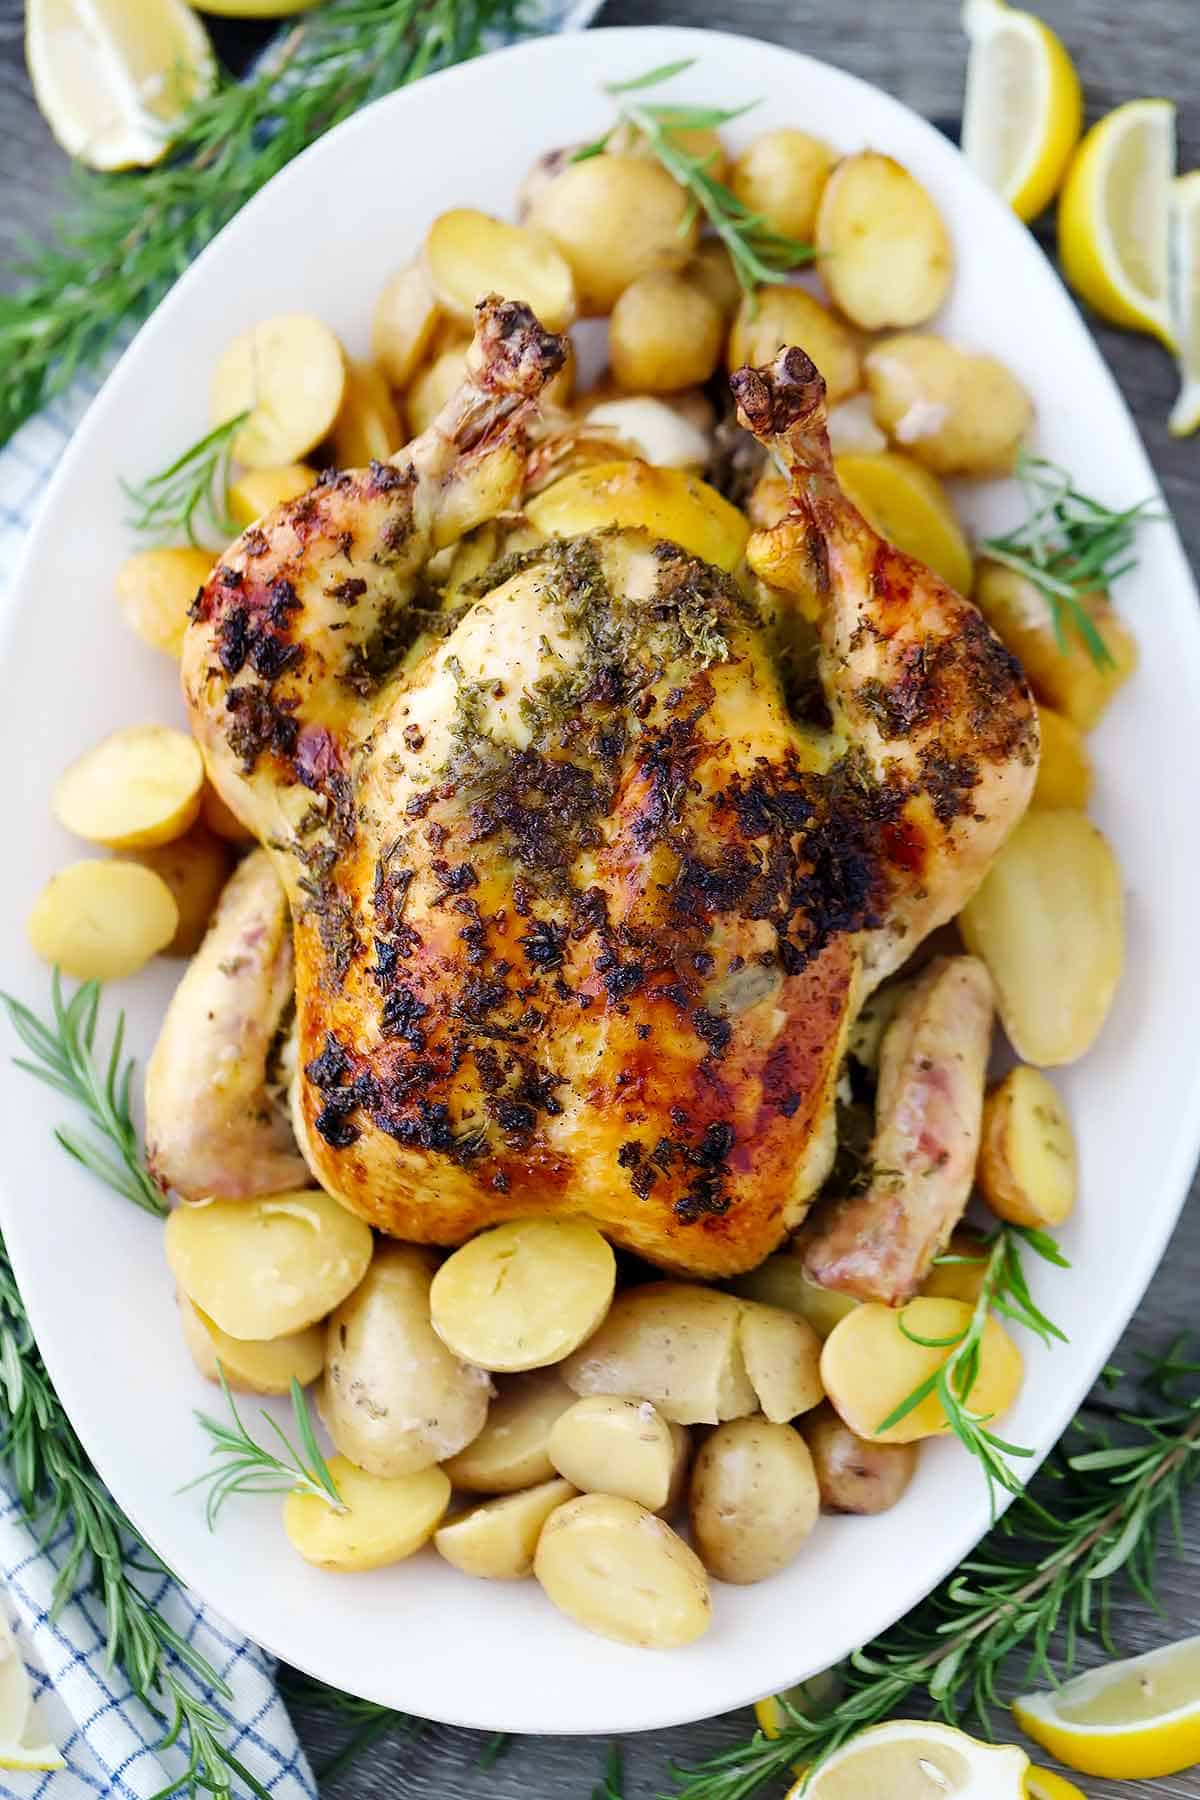 Overhead shot of a whole roasted chicken with potatoes, rosemary, and lemon.